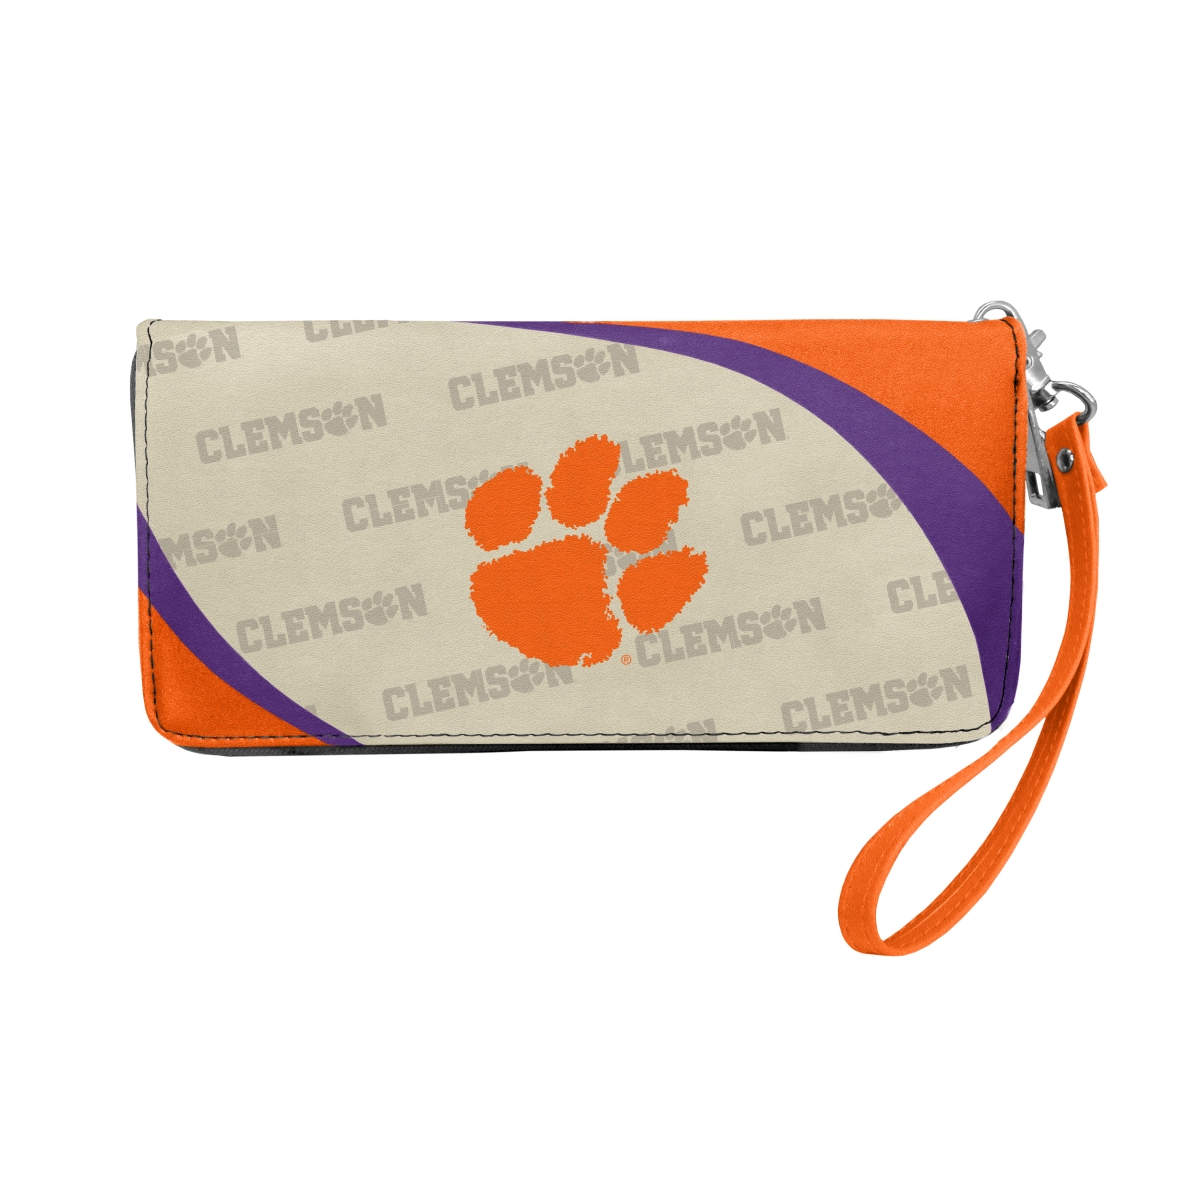 Picture of Little Earth 100902-CLEM NCAA Curve Zip Organizer Wallet - Clemson Tigers